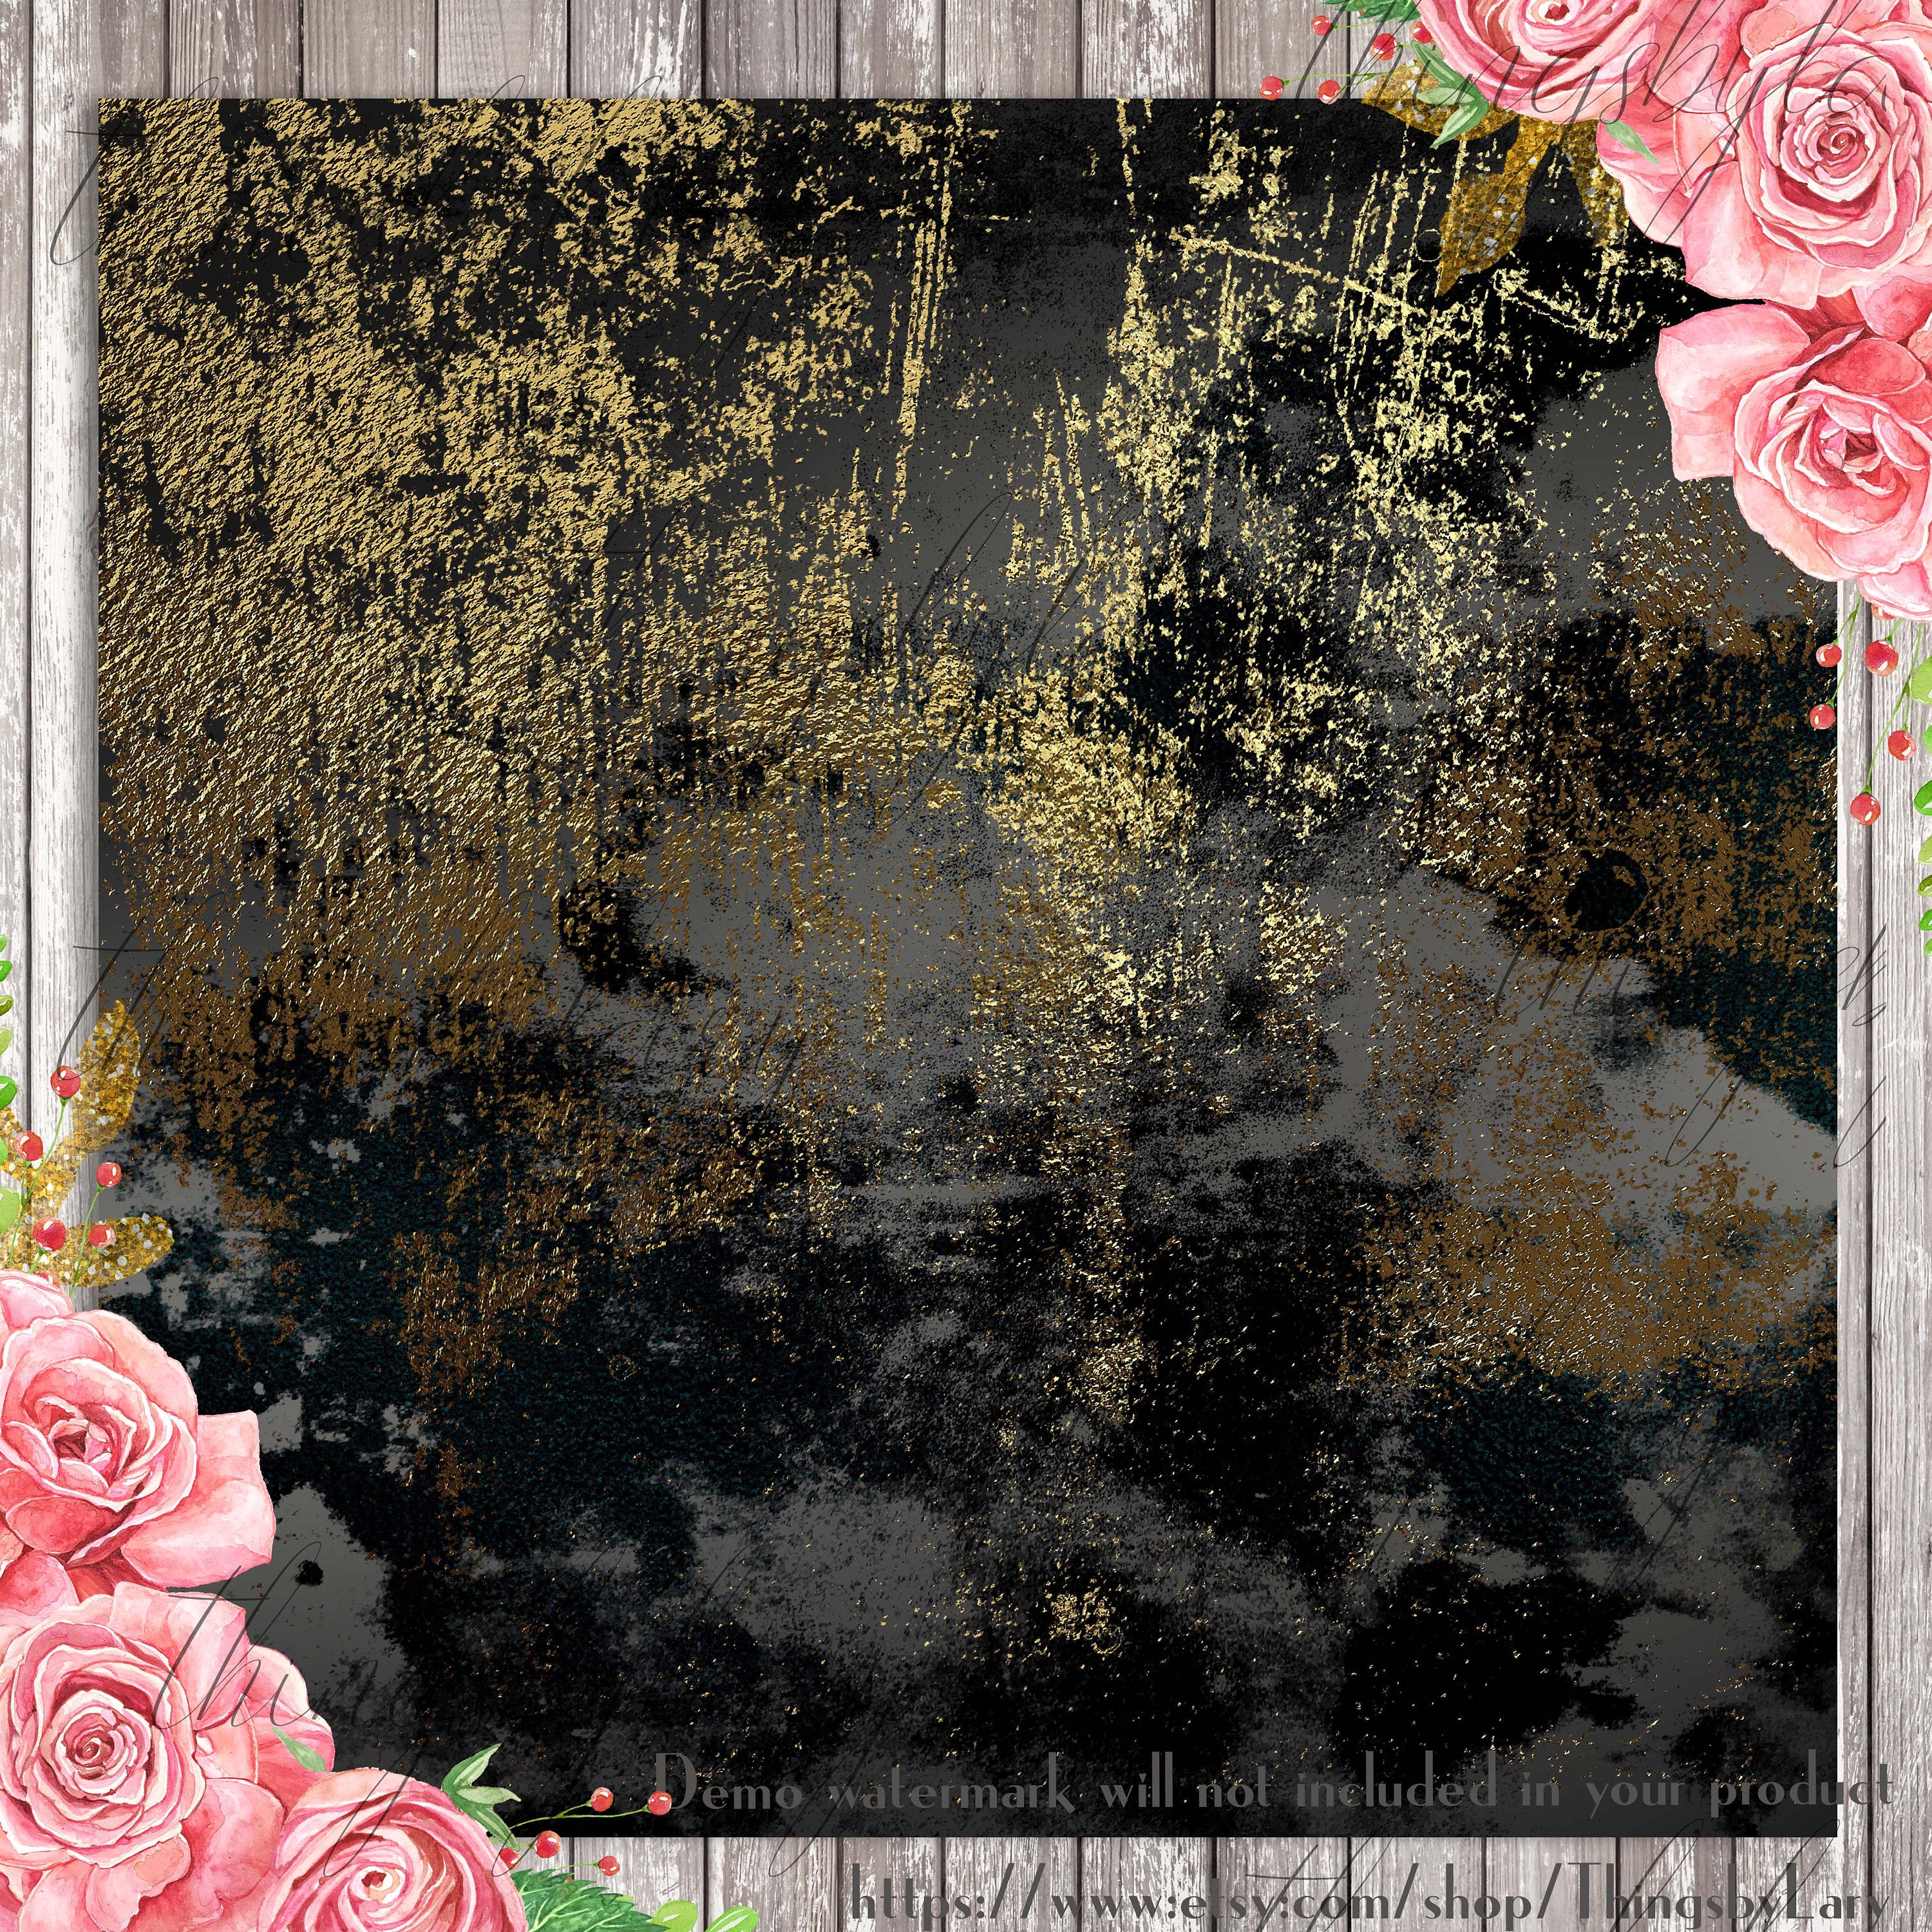 16 Distressed Metallic Gold Foil and Black Digital Papers 12&quot; 300 Dpi Planner Paper Scrapbook Digital Artistic Grunge Gold Paint Gold Marble